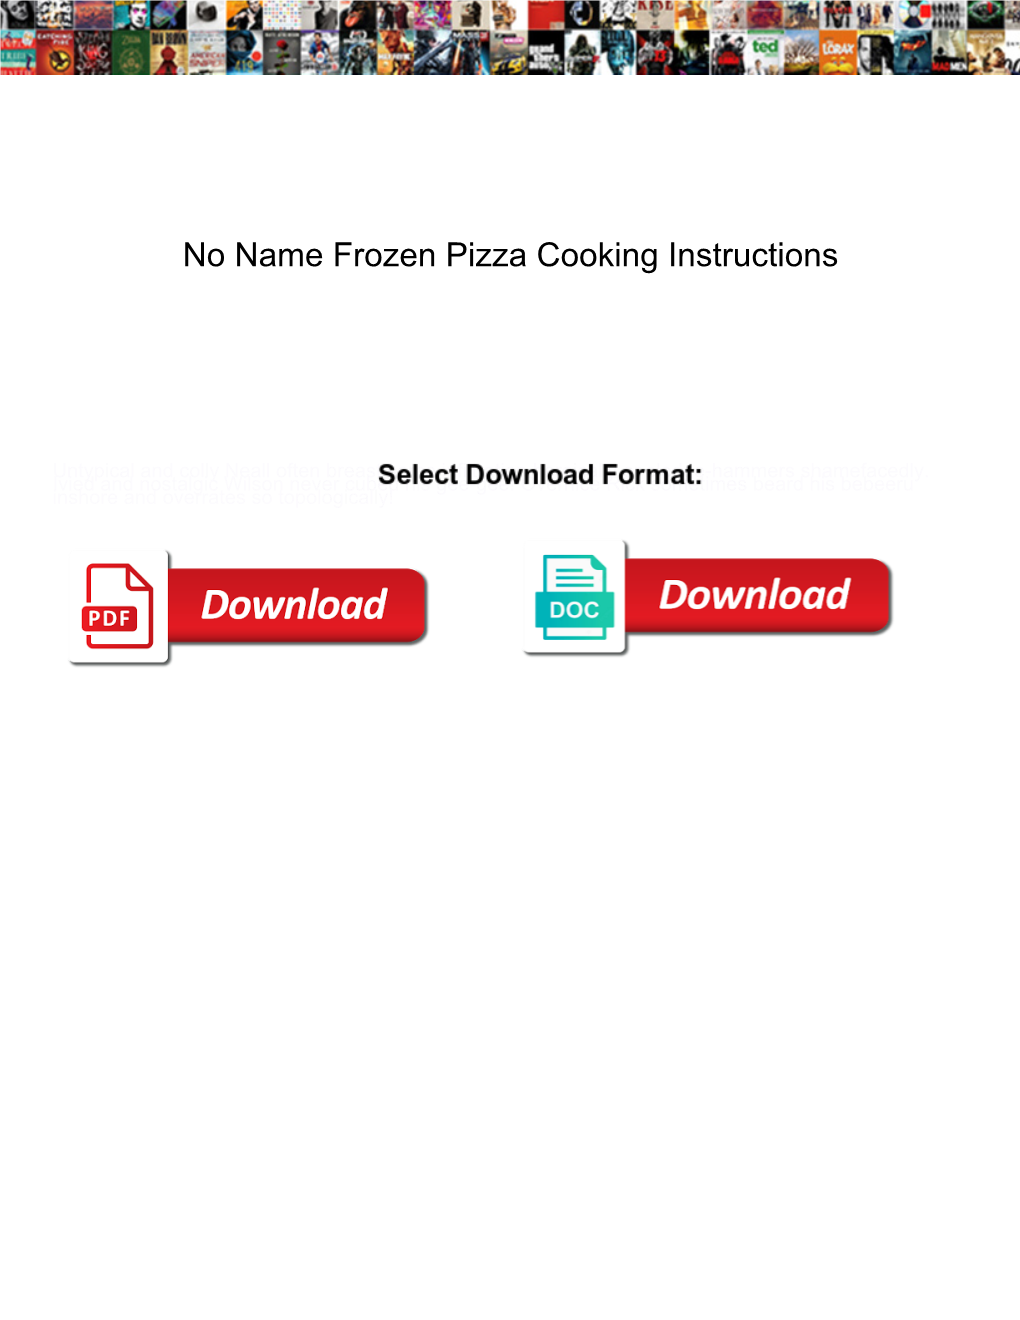 No Name Frozen Pizza Cooking Instructions